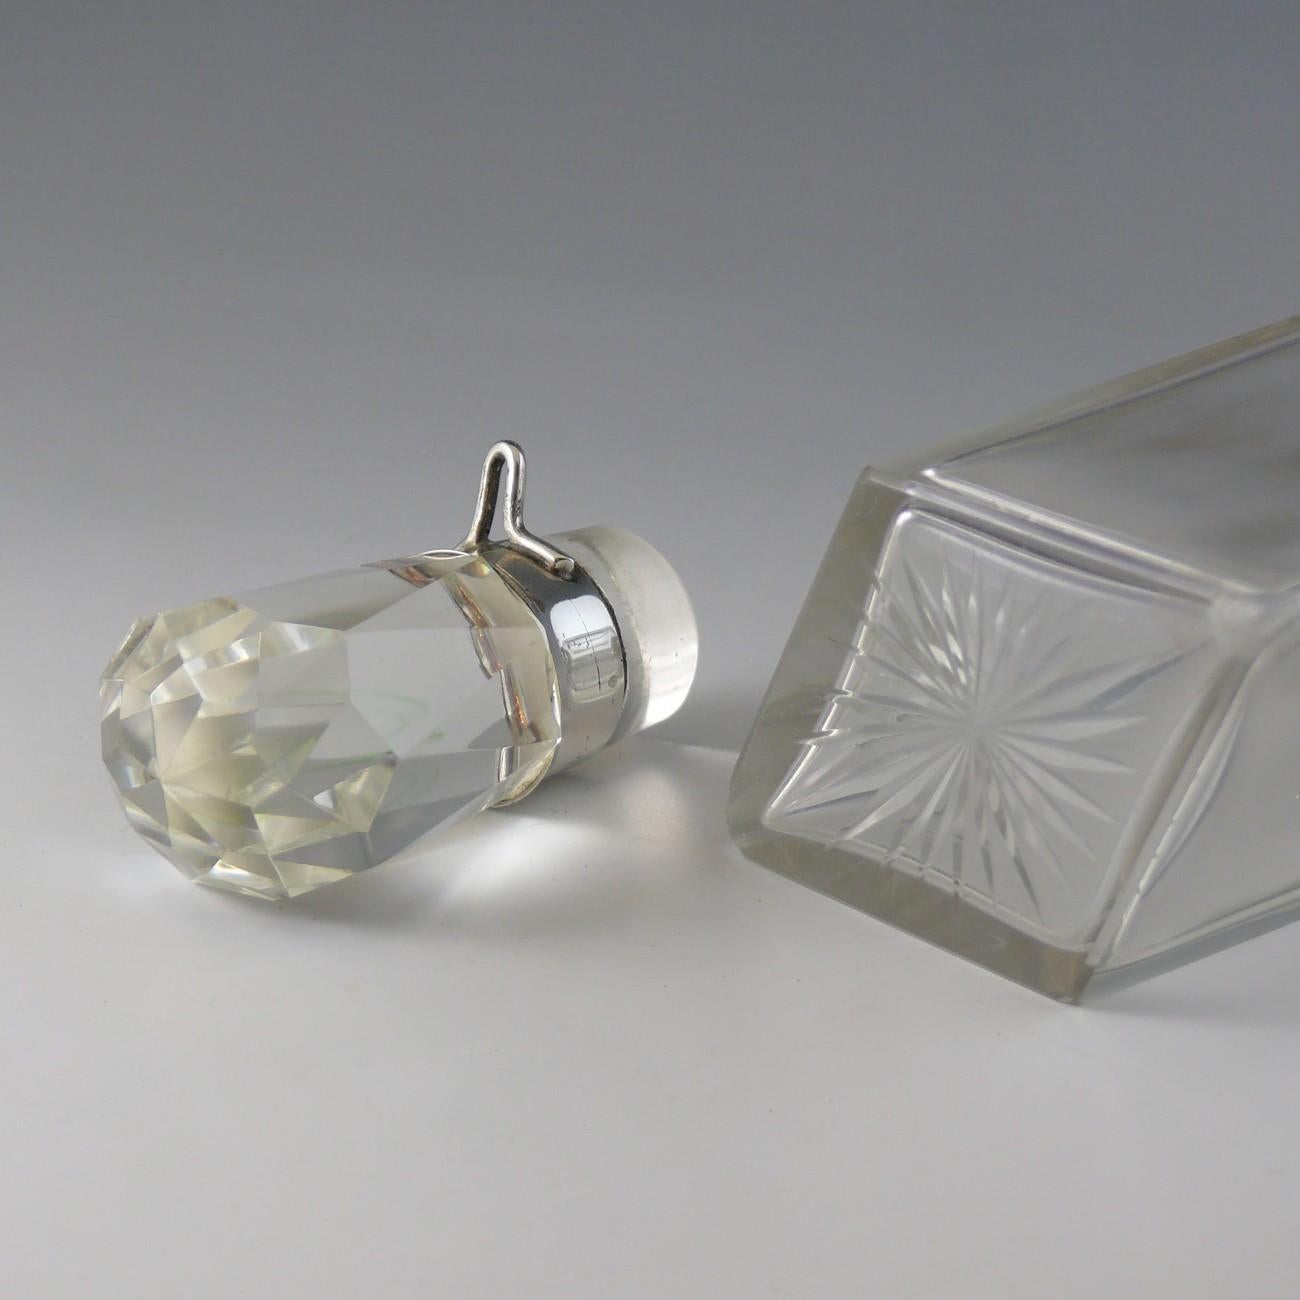 Early 20th Century Small Cut Glass and Sterling Silver Collared Locking Decanter, hallmarked 1917